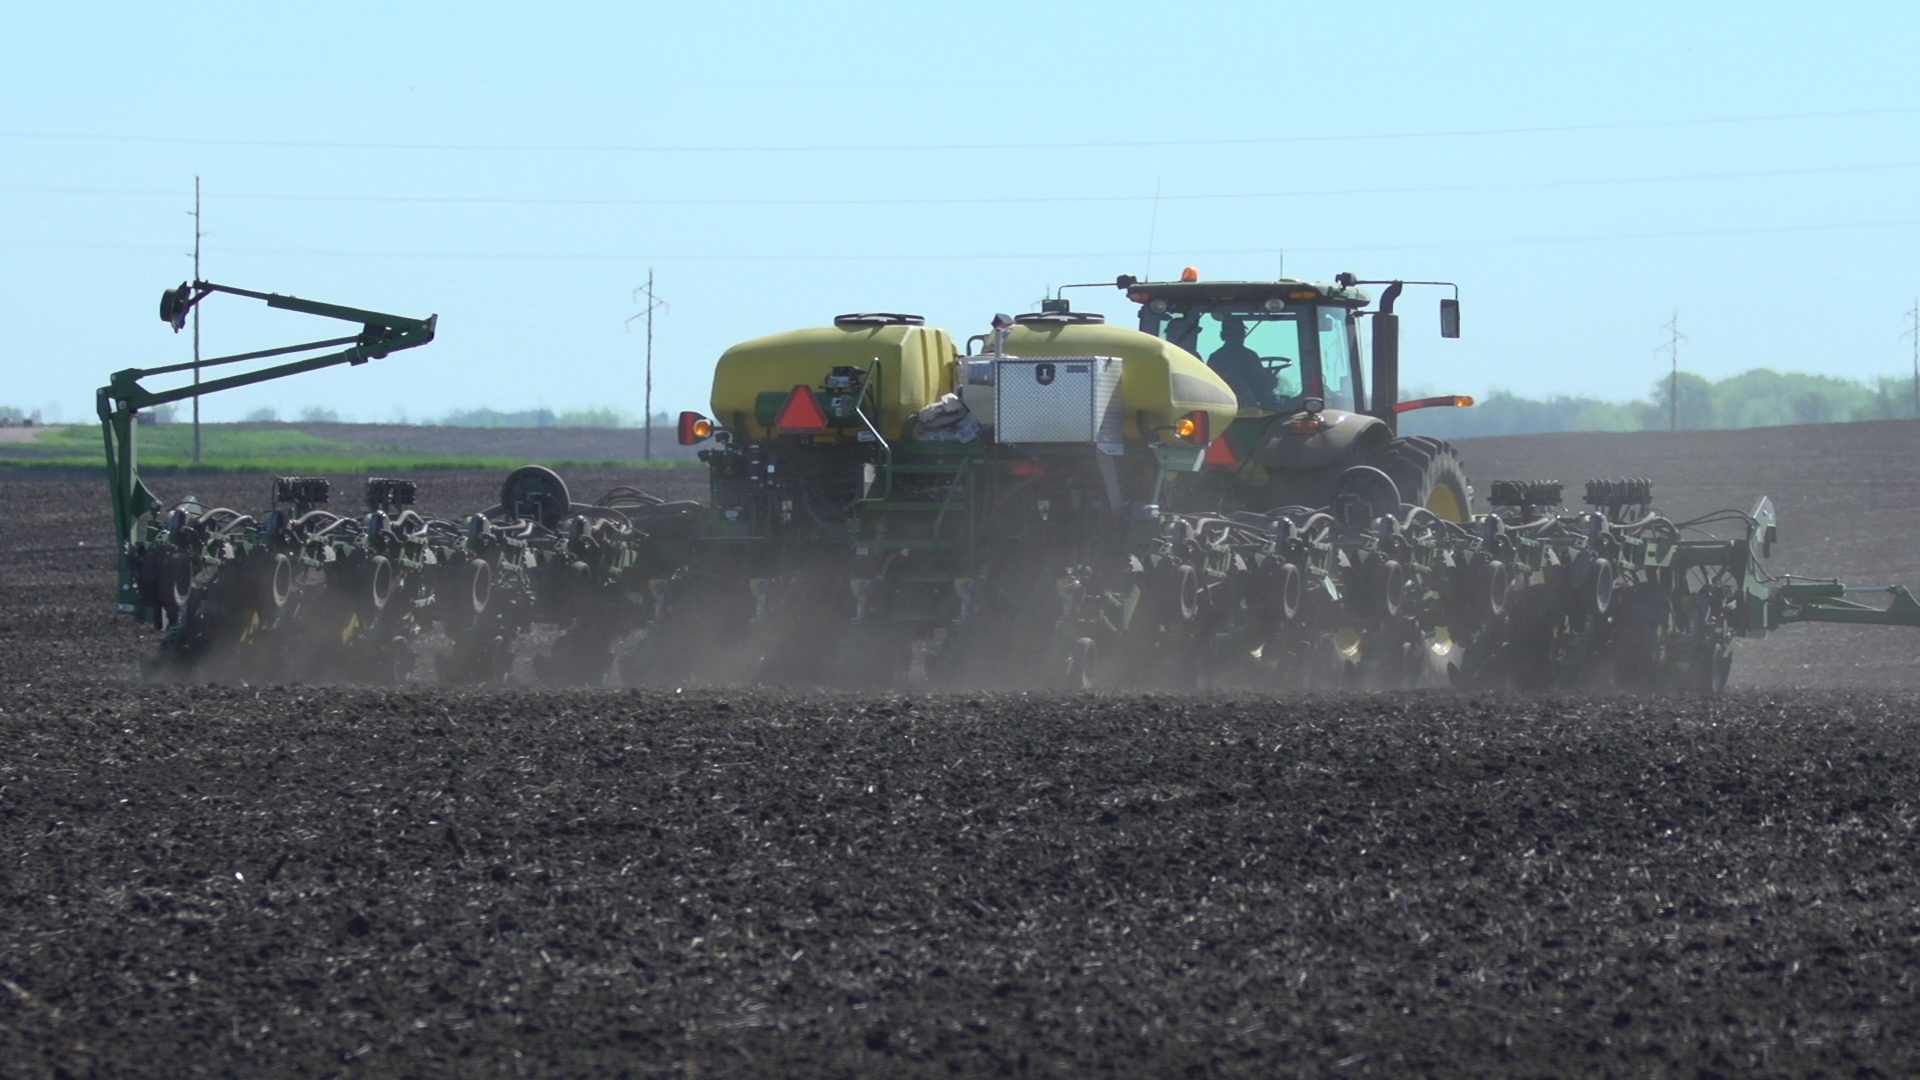 This agronomic image shows a seed planter